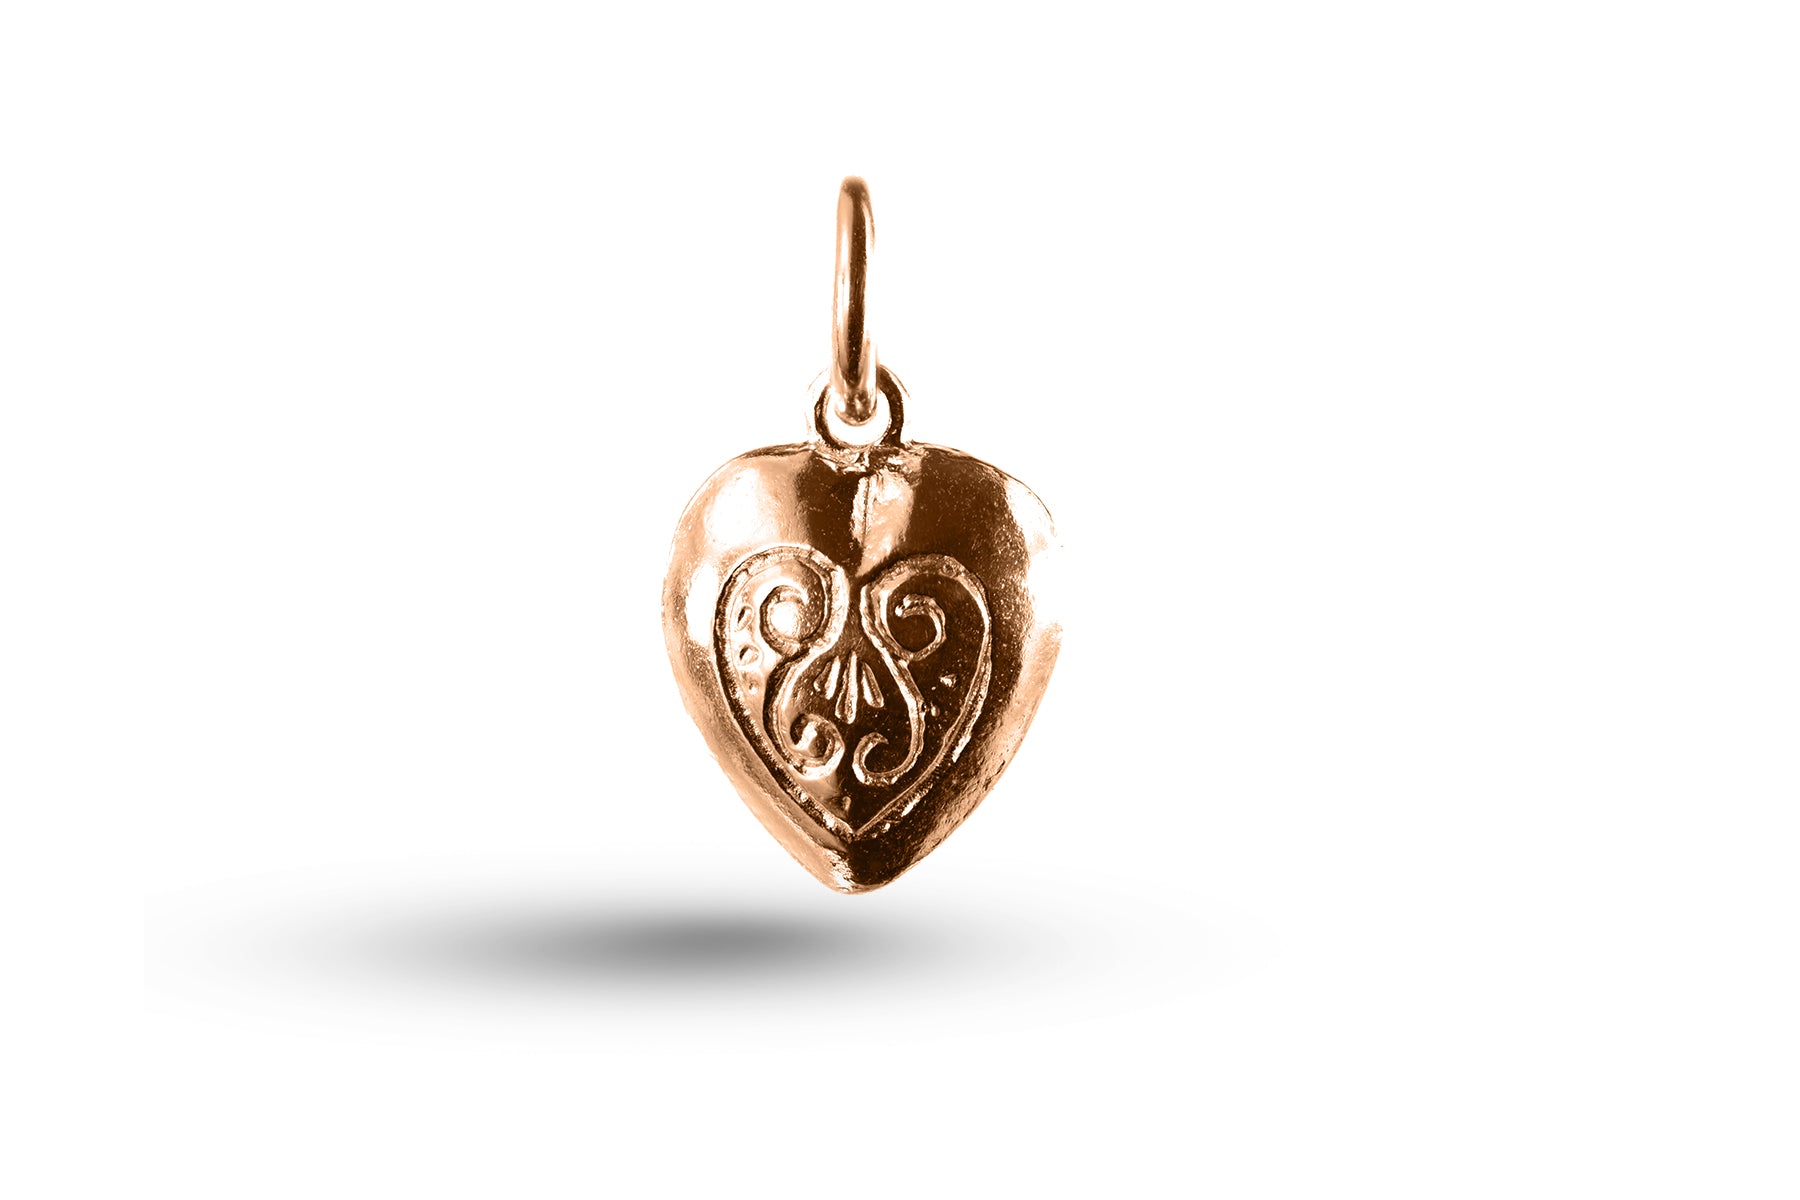 Rose gold Patterned Heart charm.